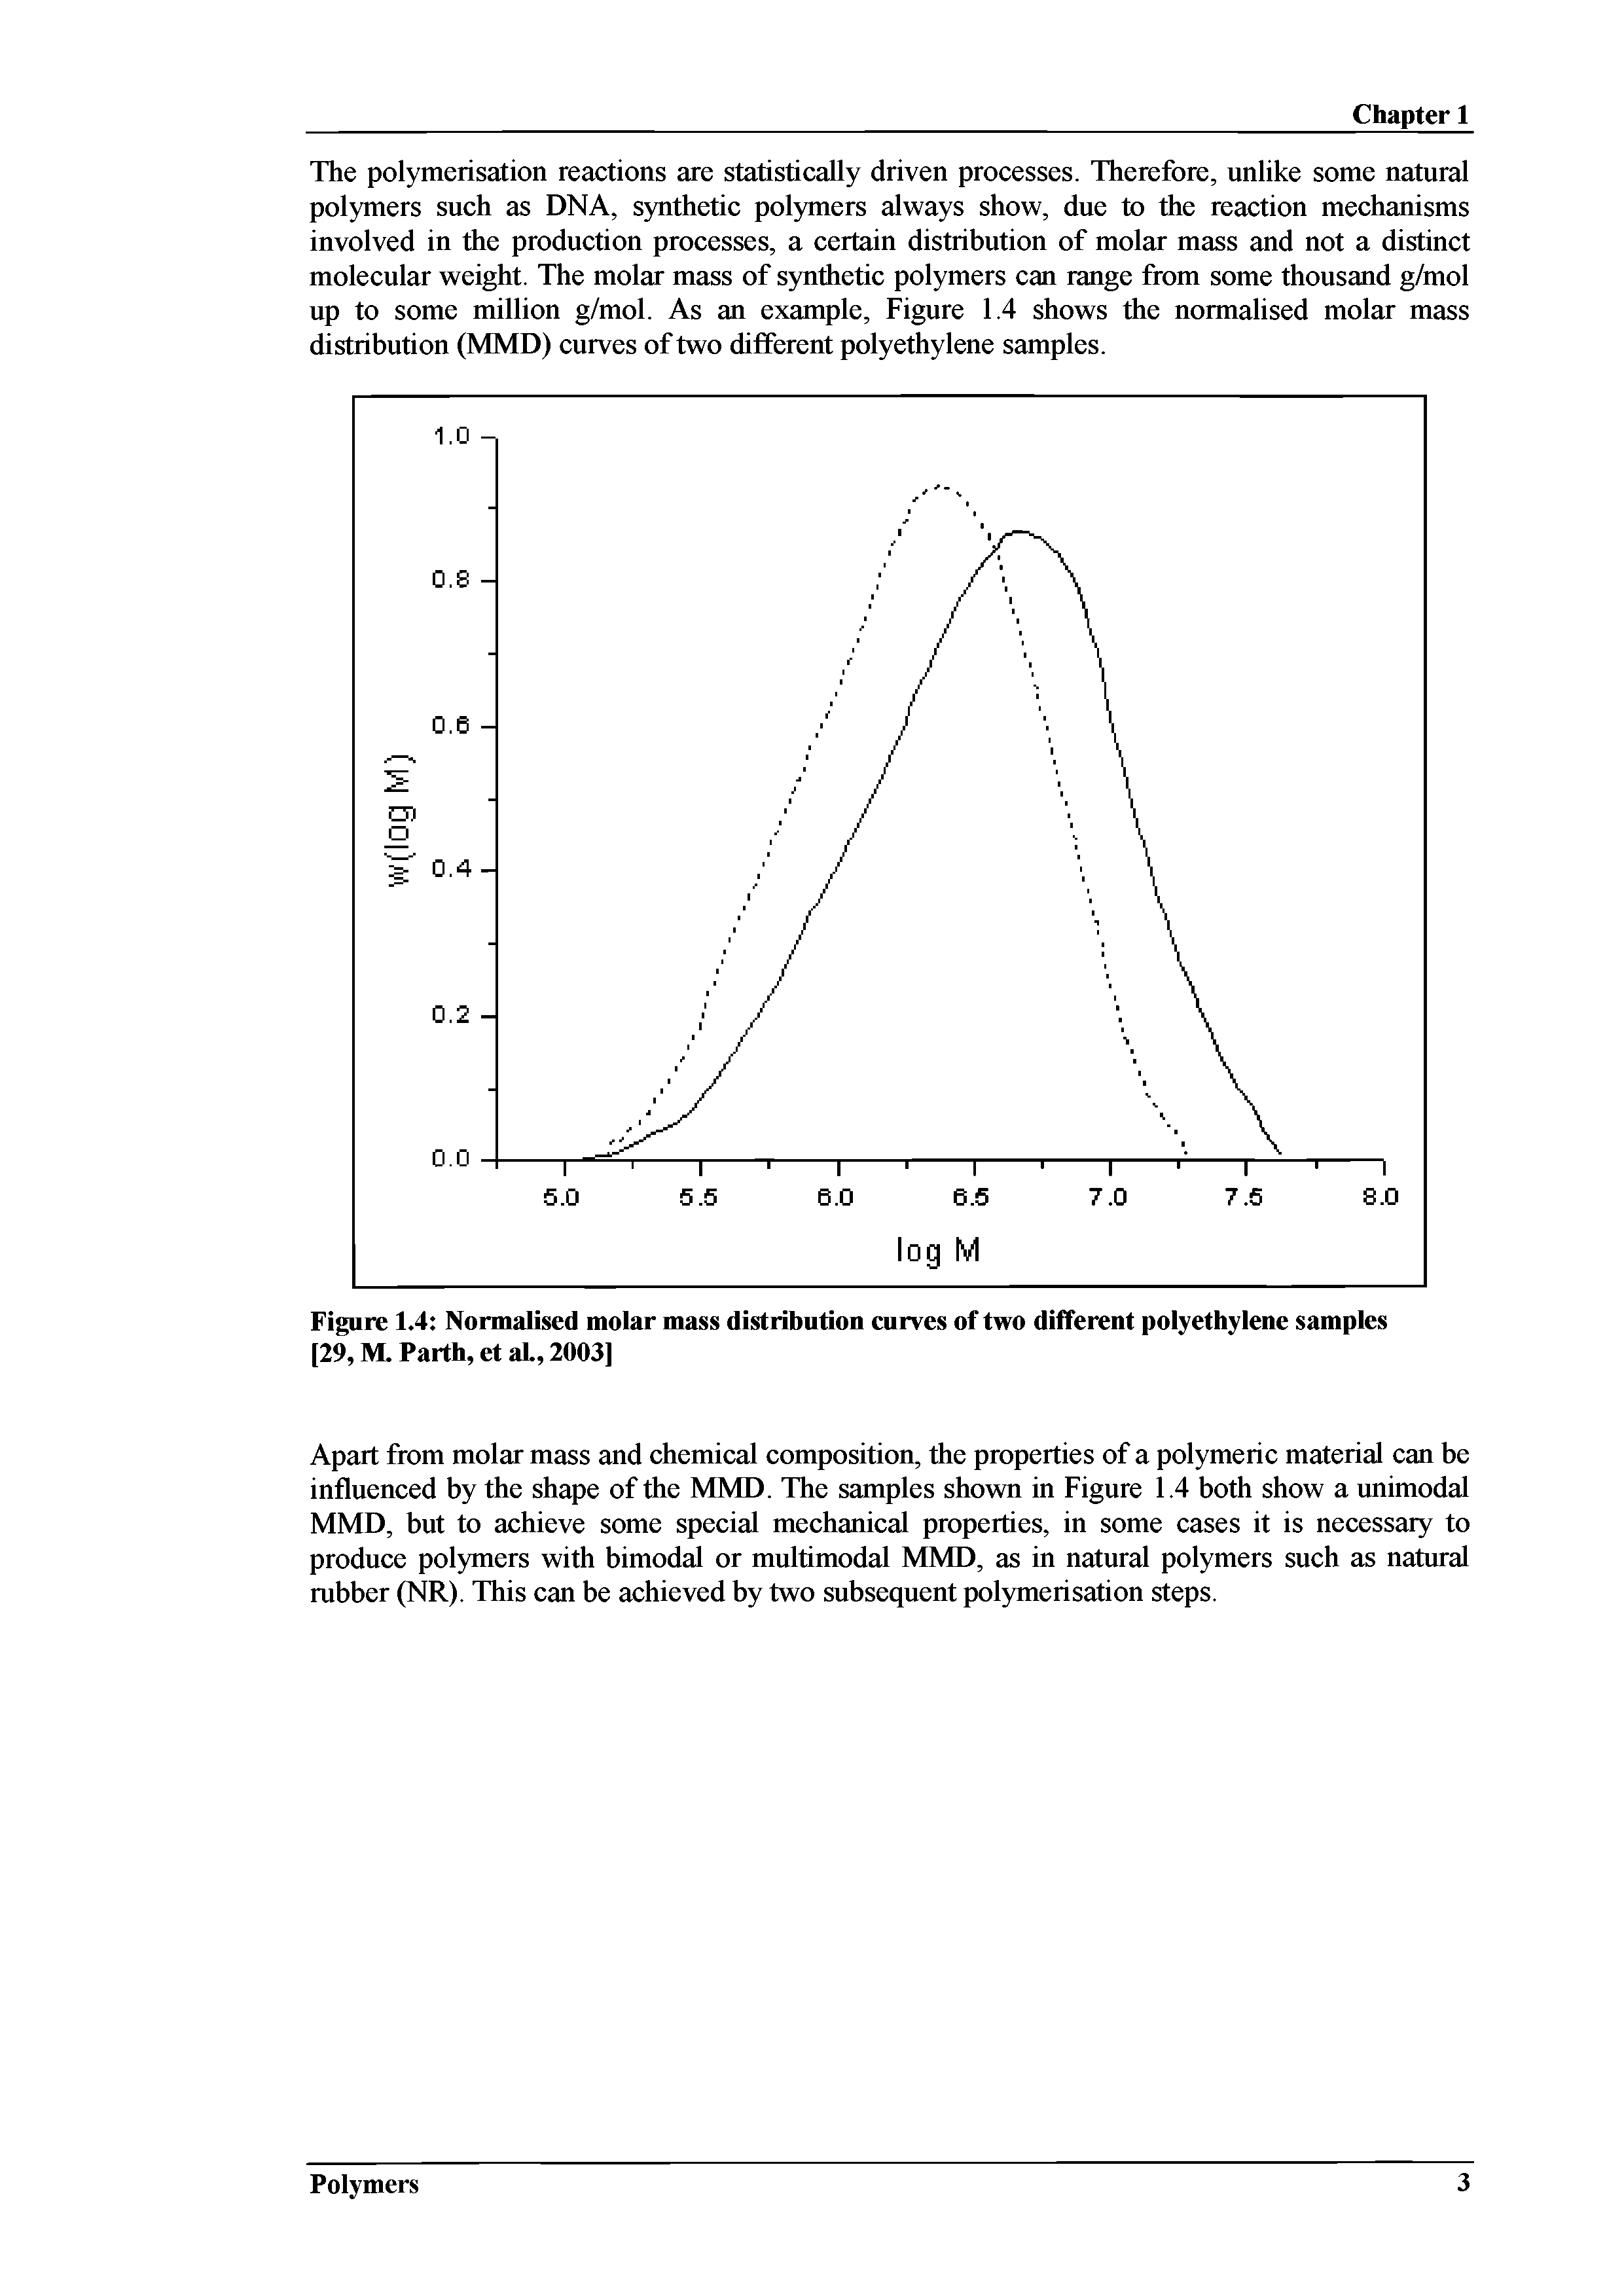 Figure 1.4 Normalised molar mass distribution curves of two different polyethylene samples [29, M. Parth, et aL, 2003]...